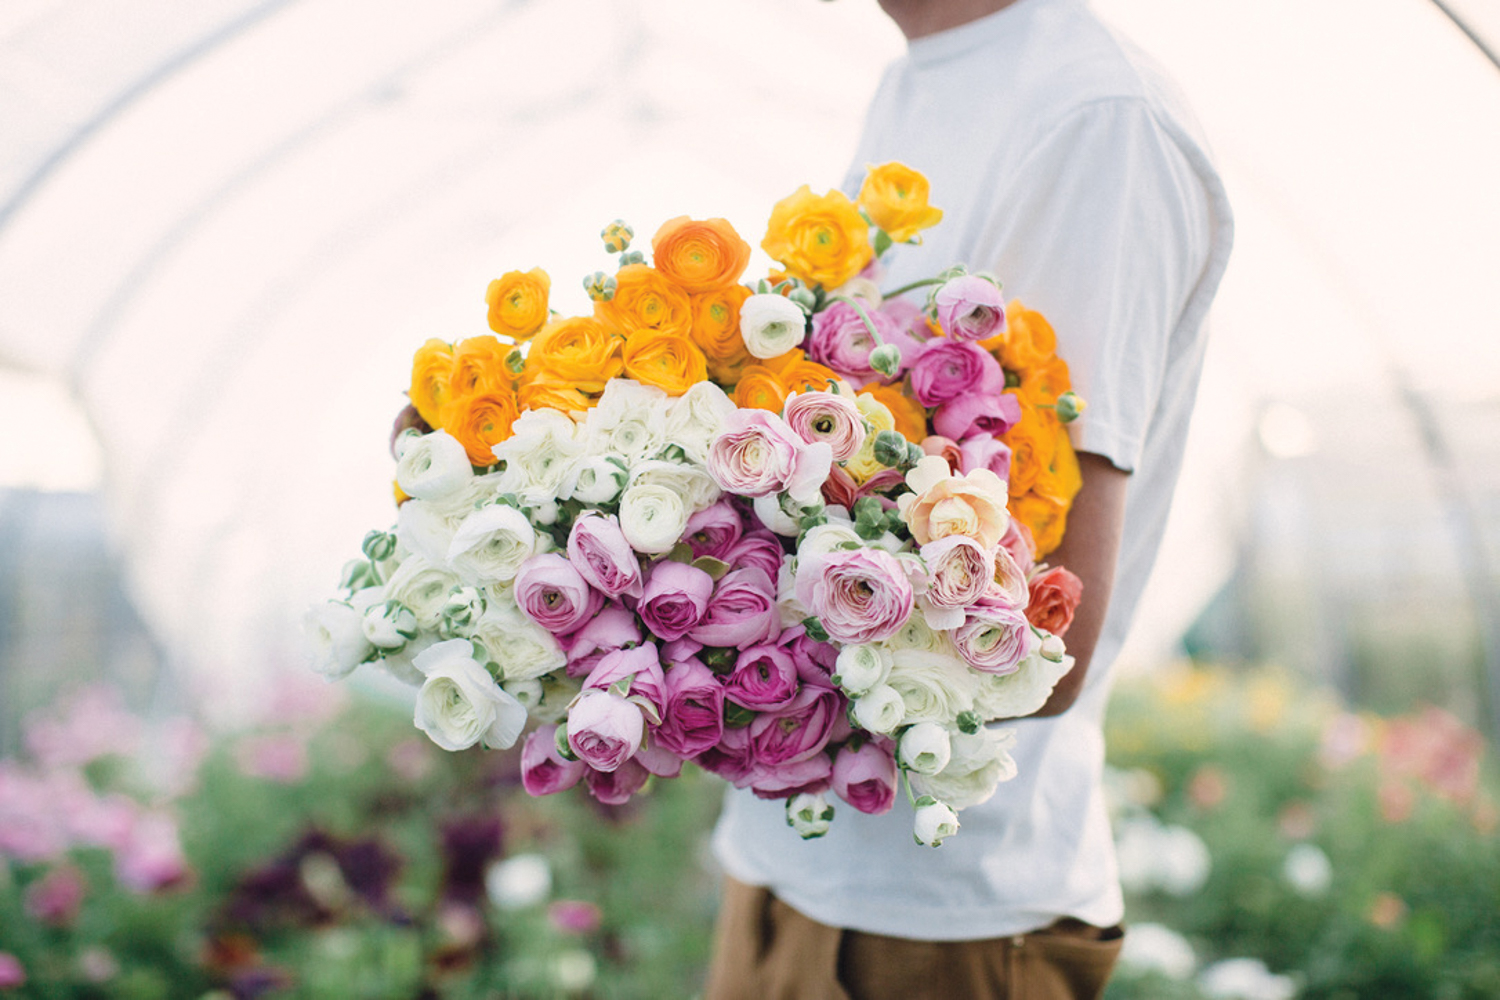 Man in a white shirt holding a bouquet of orange, white and pink flowers